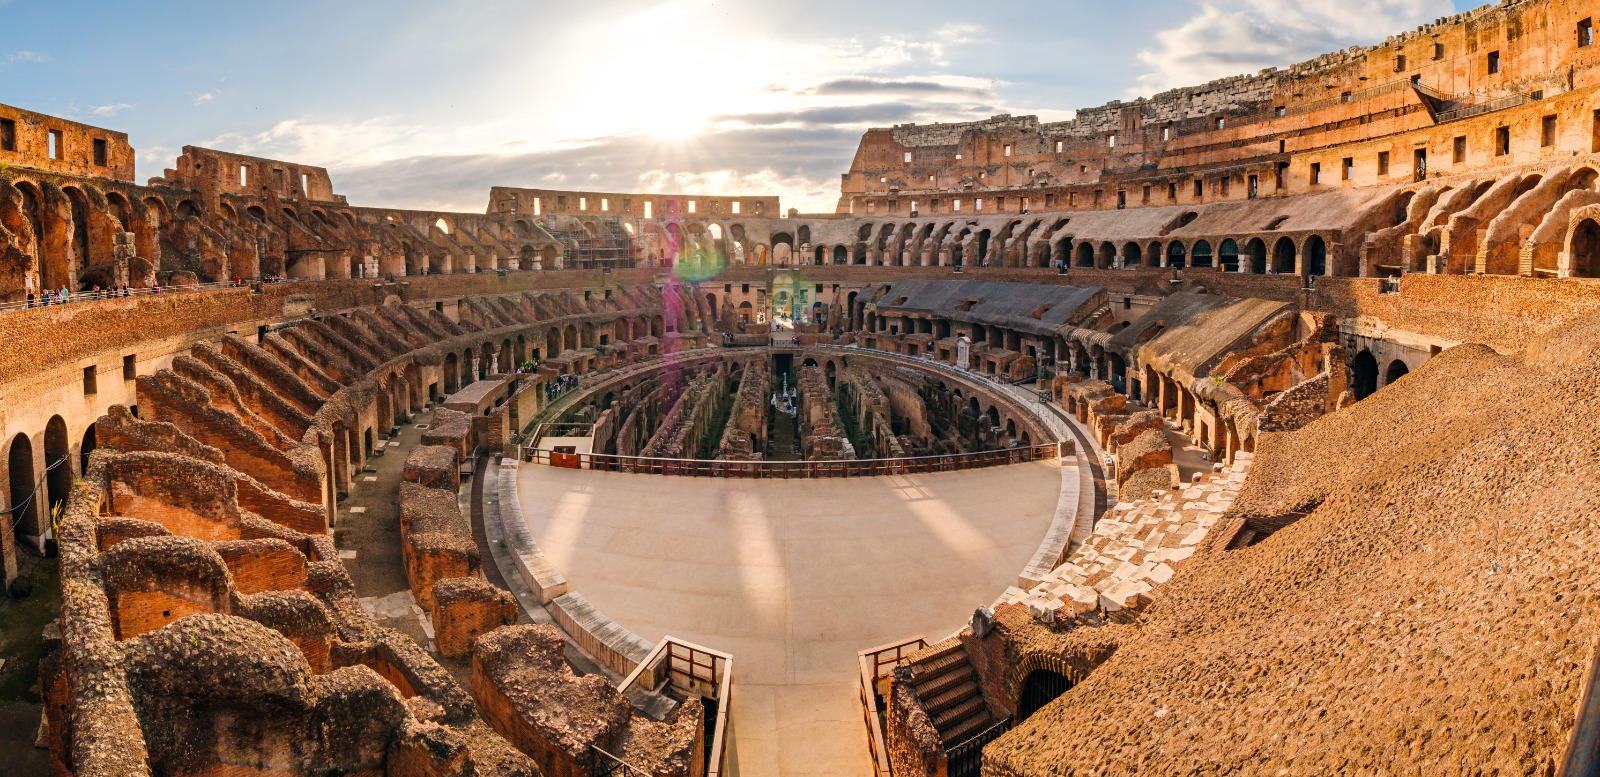 Exclusive Gladiator Experience of Colosseum Arena & Ancient Rome